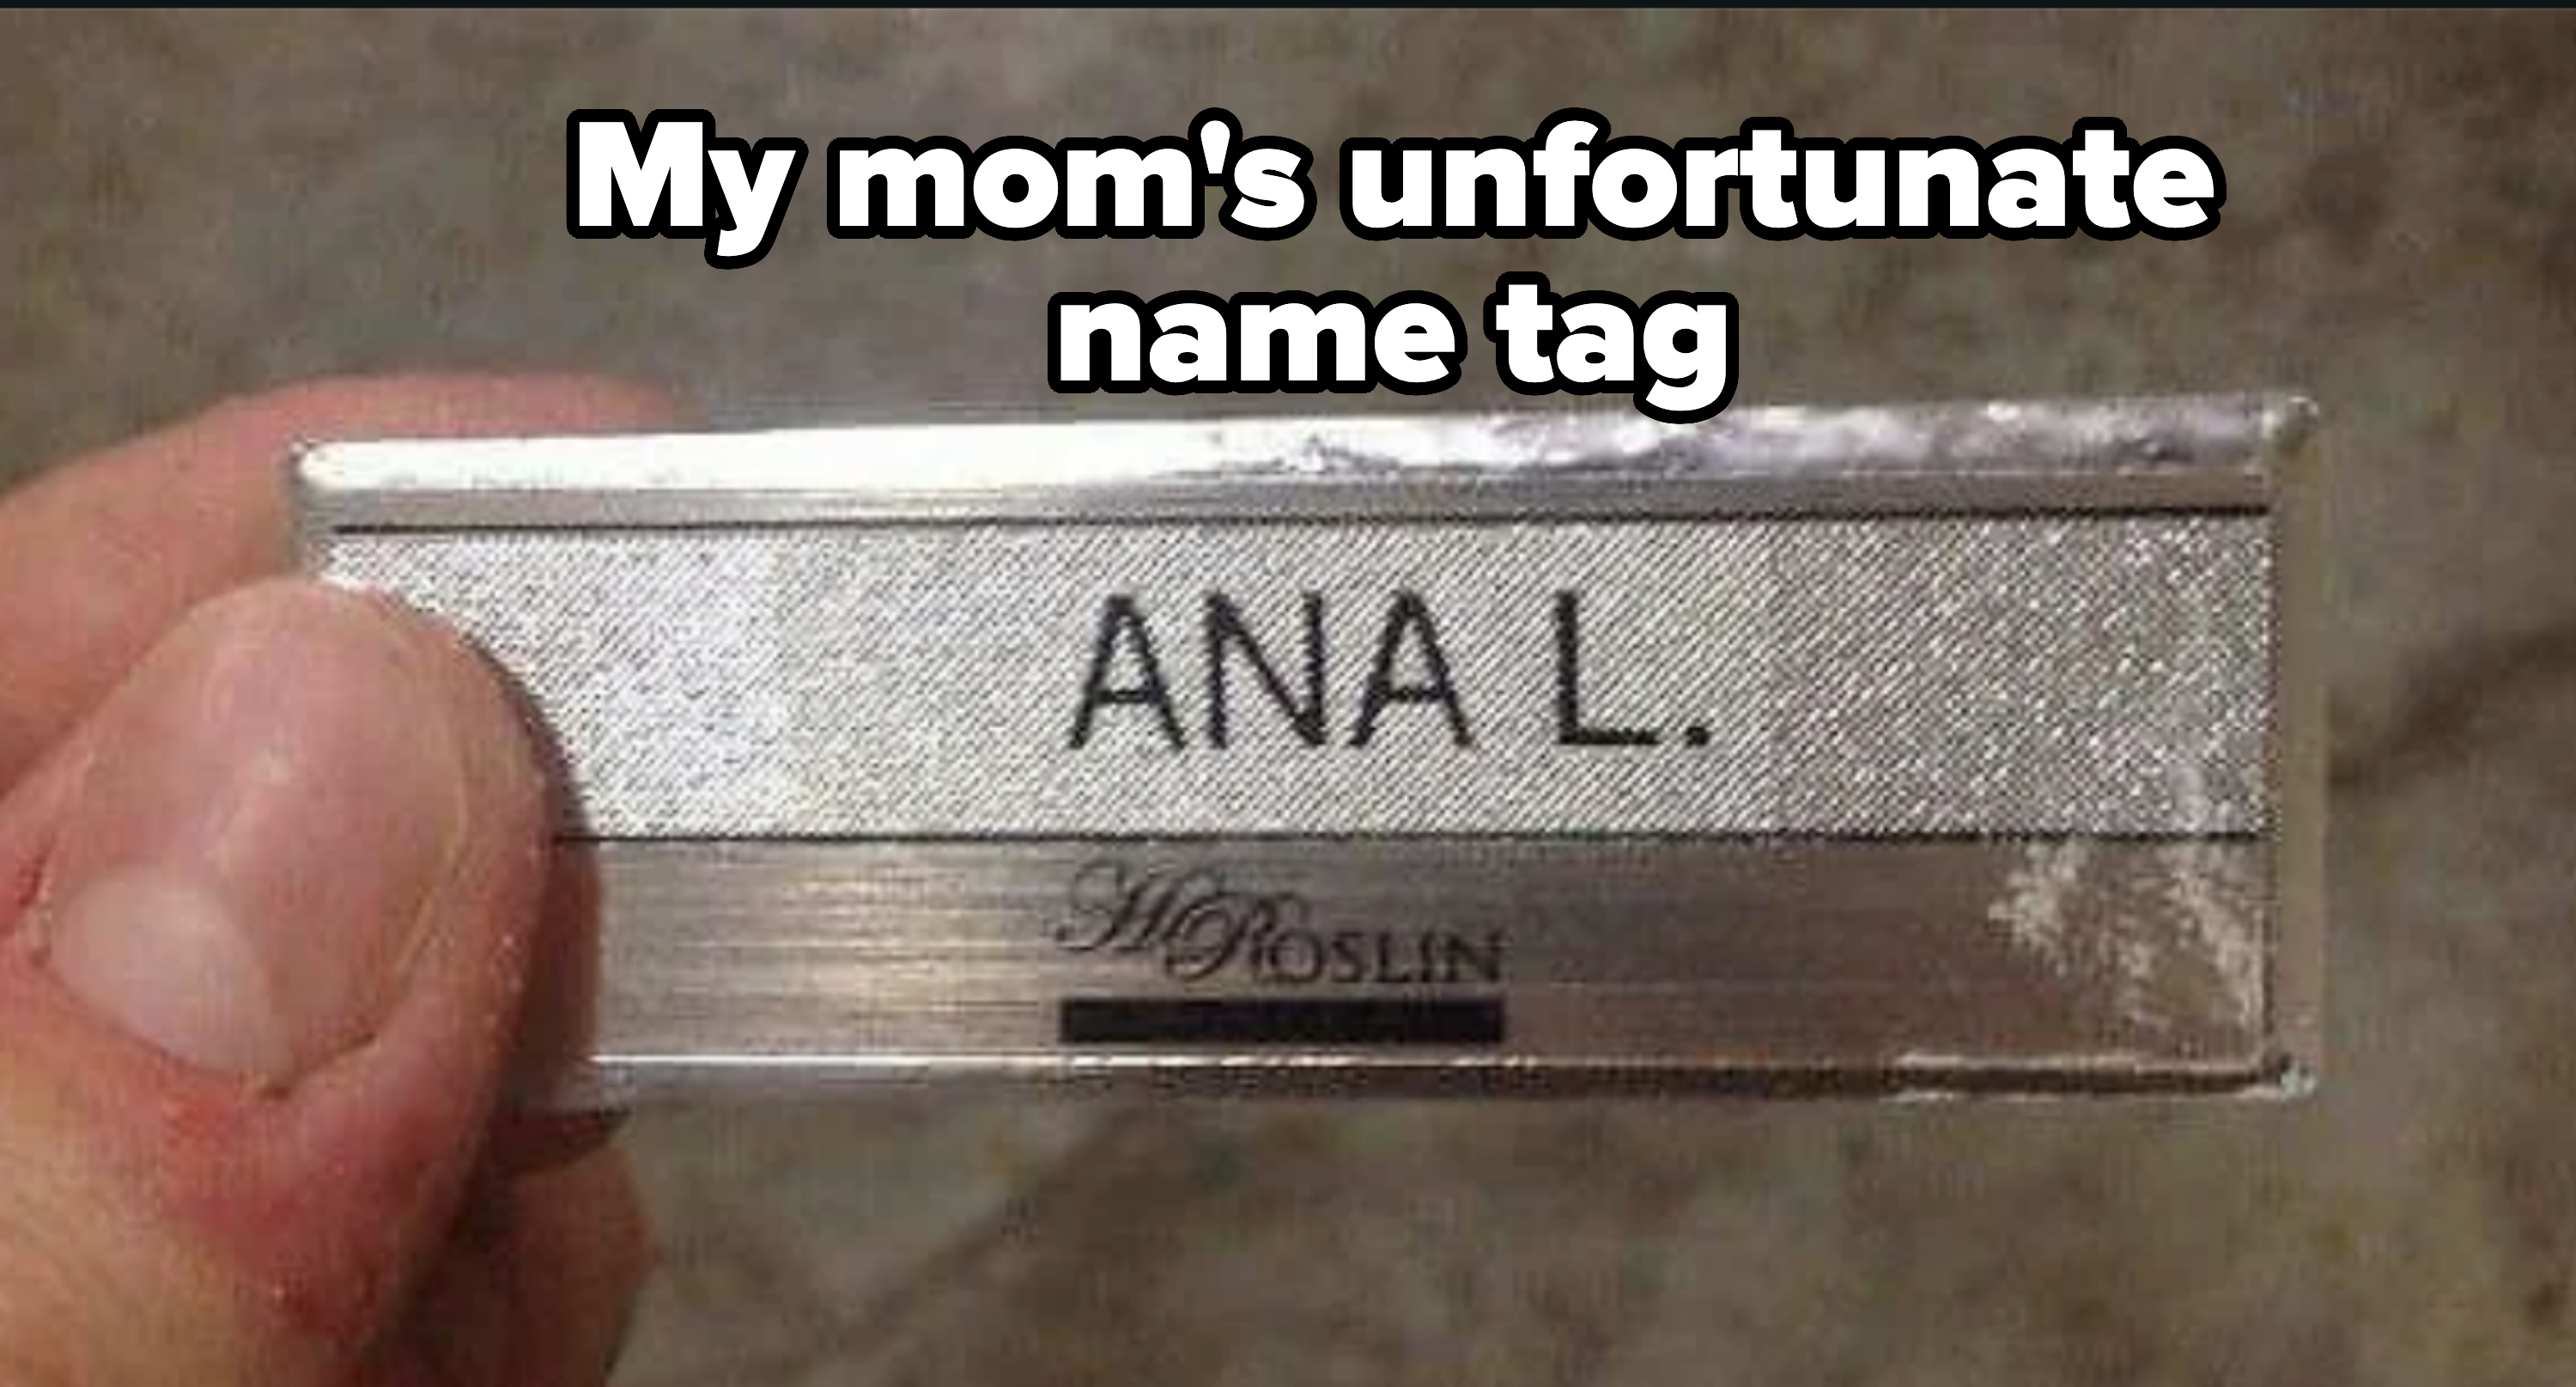 Name badge with the text &quot;ANA L.&quot; held up close, below a logo reads &quot;St. Roslin&quot;